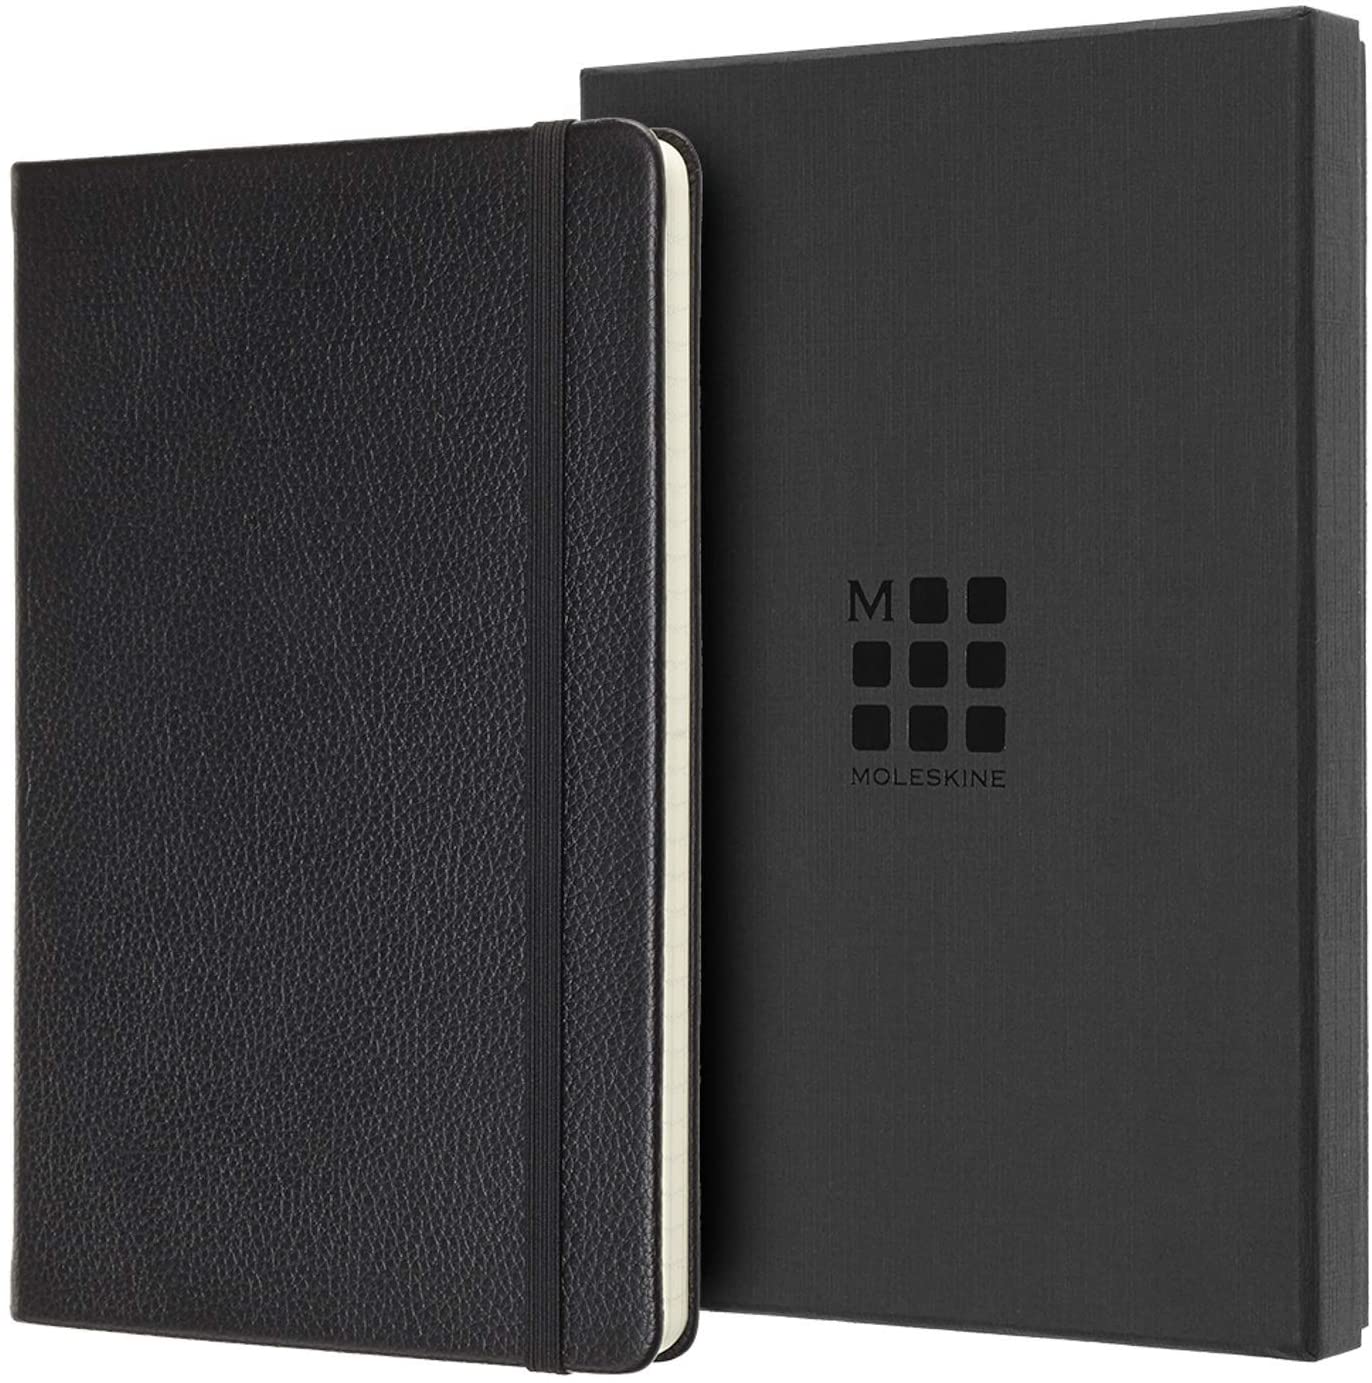 Moleskine Classic Leather Collection - In Box - Hard Cover